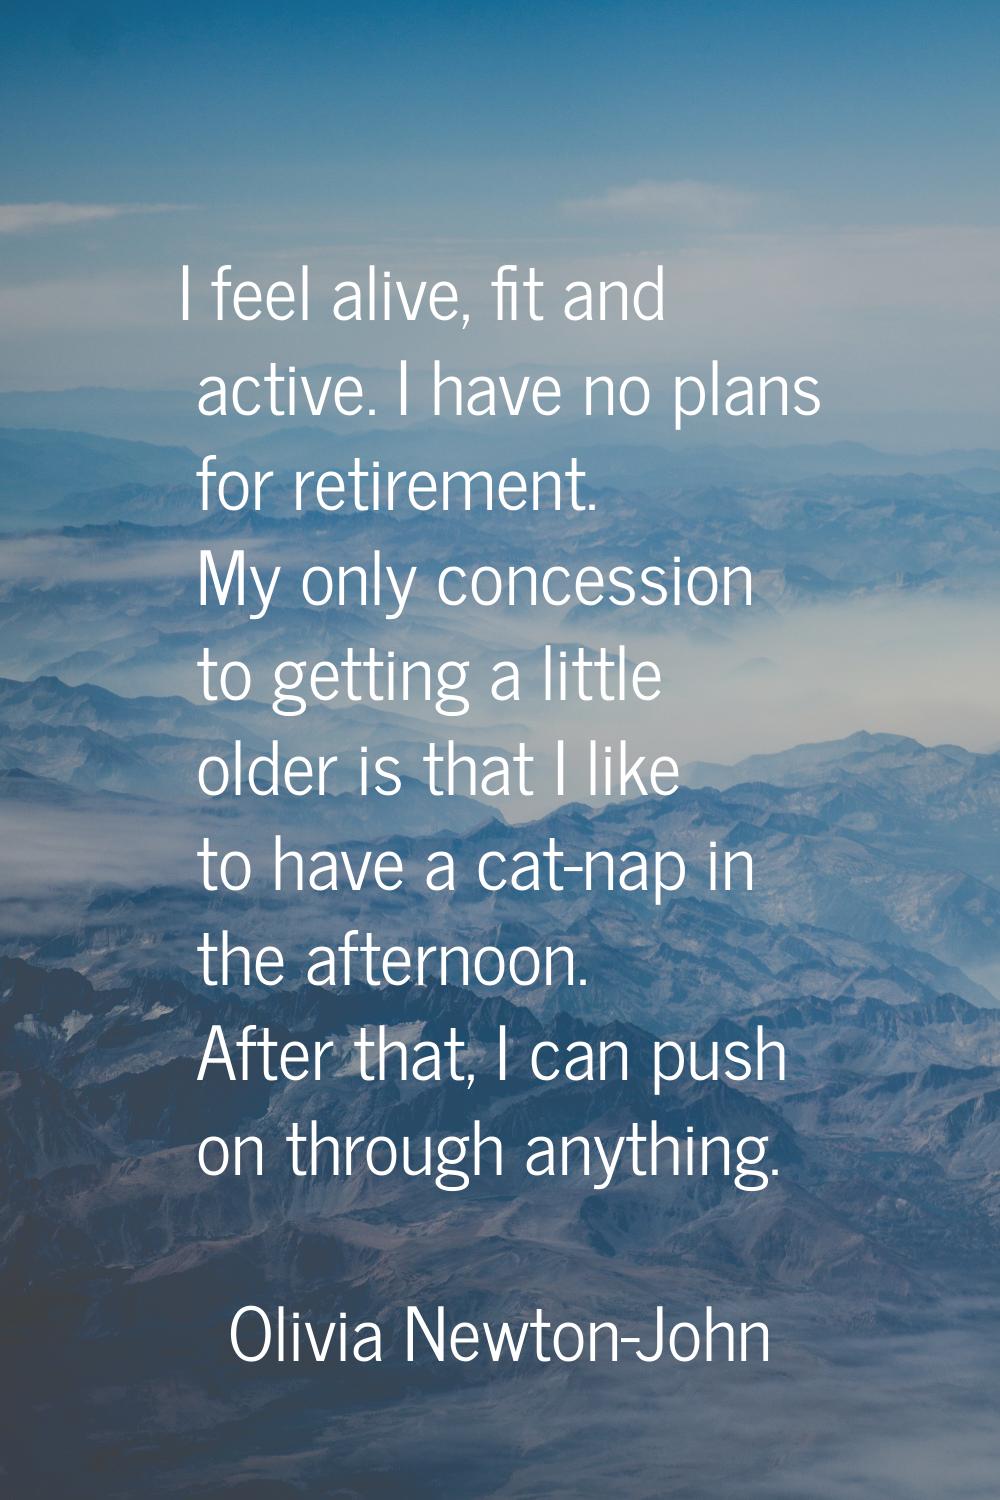 I feel alive, fit and active. I have no plans for retirement. My only concession to getting a littl